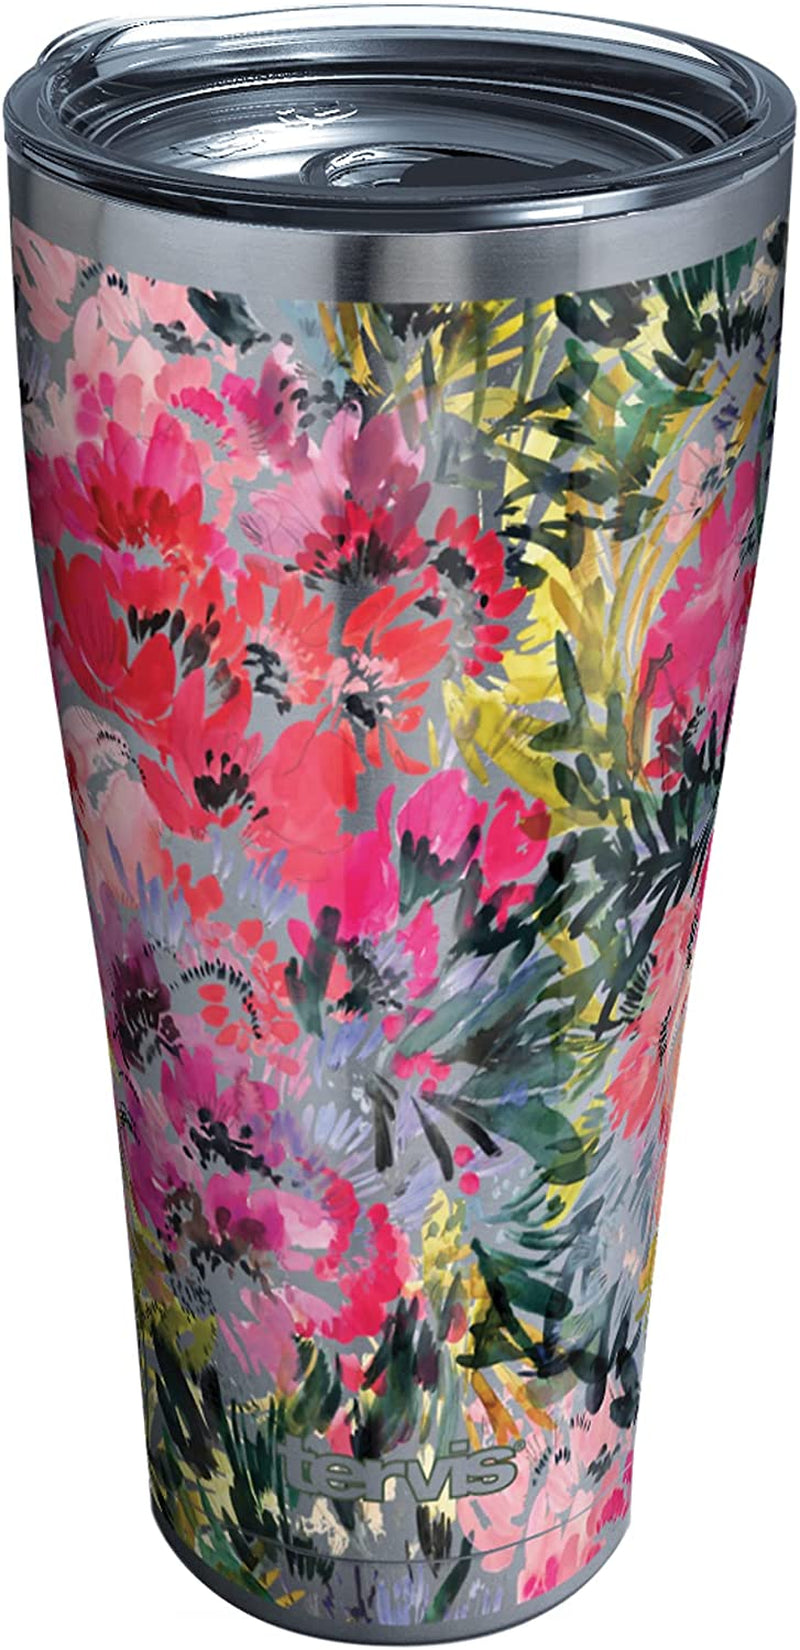 Tervis Made in USA Double Walled Kelly Ventura Floral Collection Insulated Tumbler Cup Keeps Drinks Cold & Hot, 16Oz 4Pk - Classic, Assorted Home & Garden > Kitchen & Dining > Tableware > Drinkware Tervis Perennial Garden 30oz - Stainless Steel 